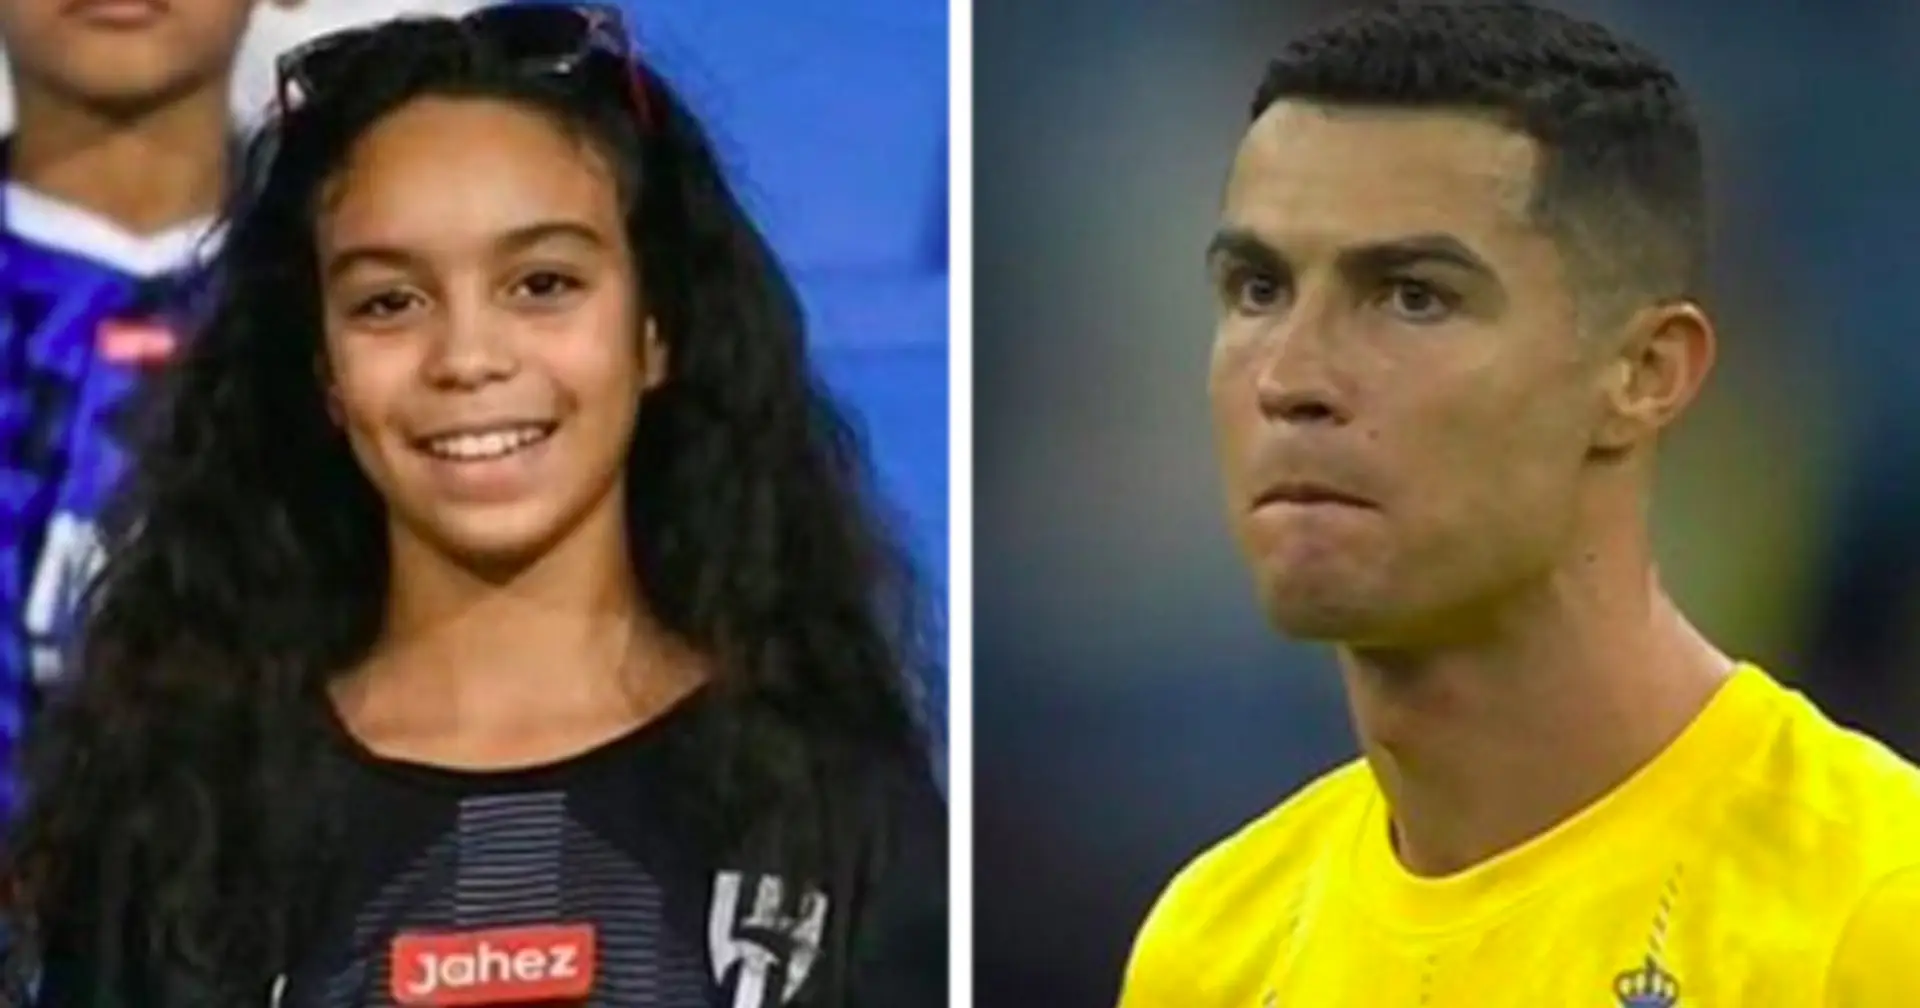 This girl is trending worldwide – she is called Ronaldo's biggest nightmare after Messi